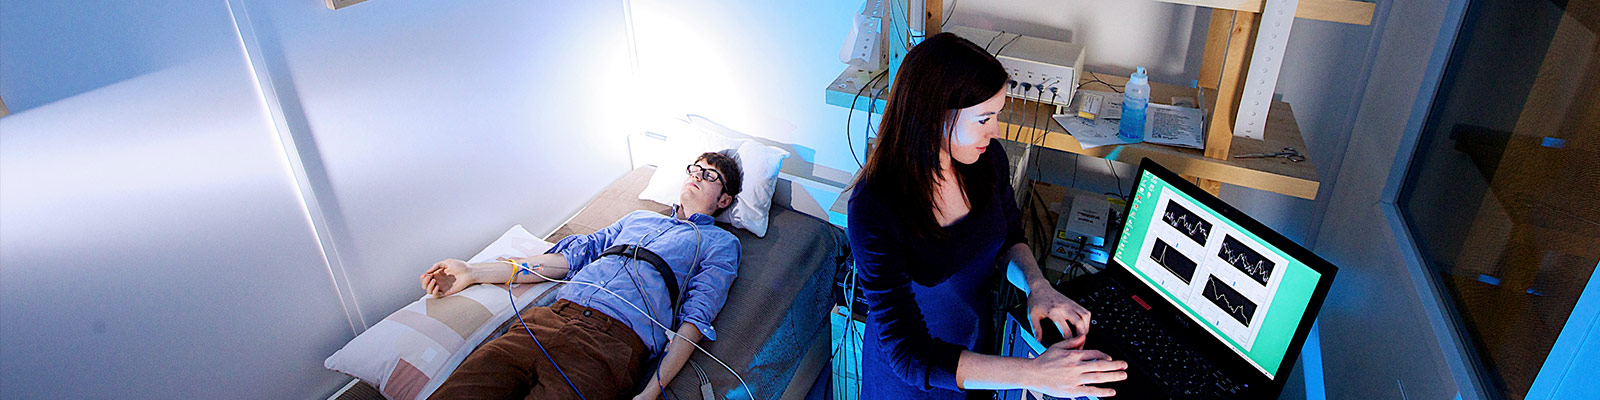 A man lies on a bed whilst a student monitors aspects of his health